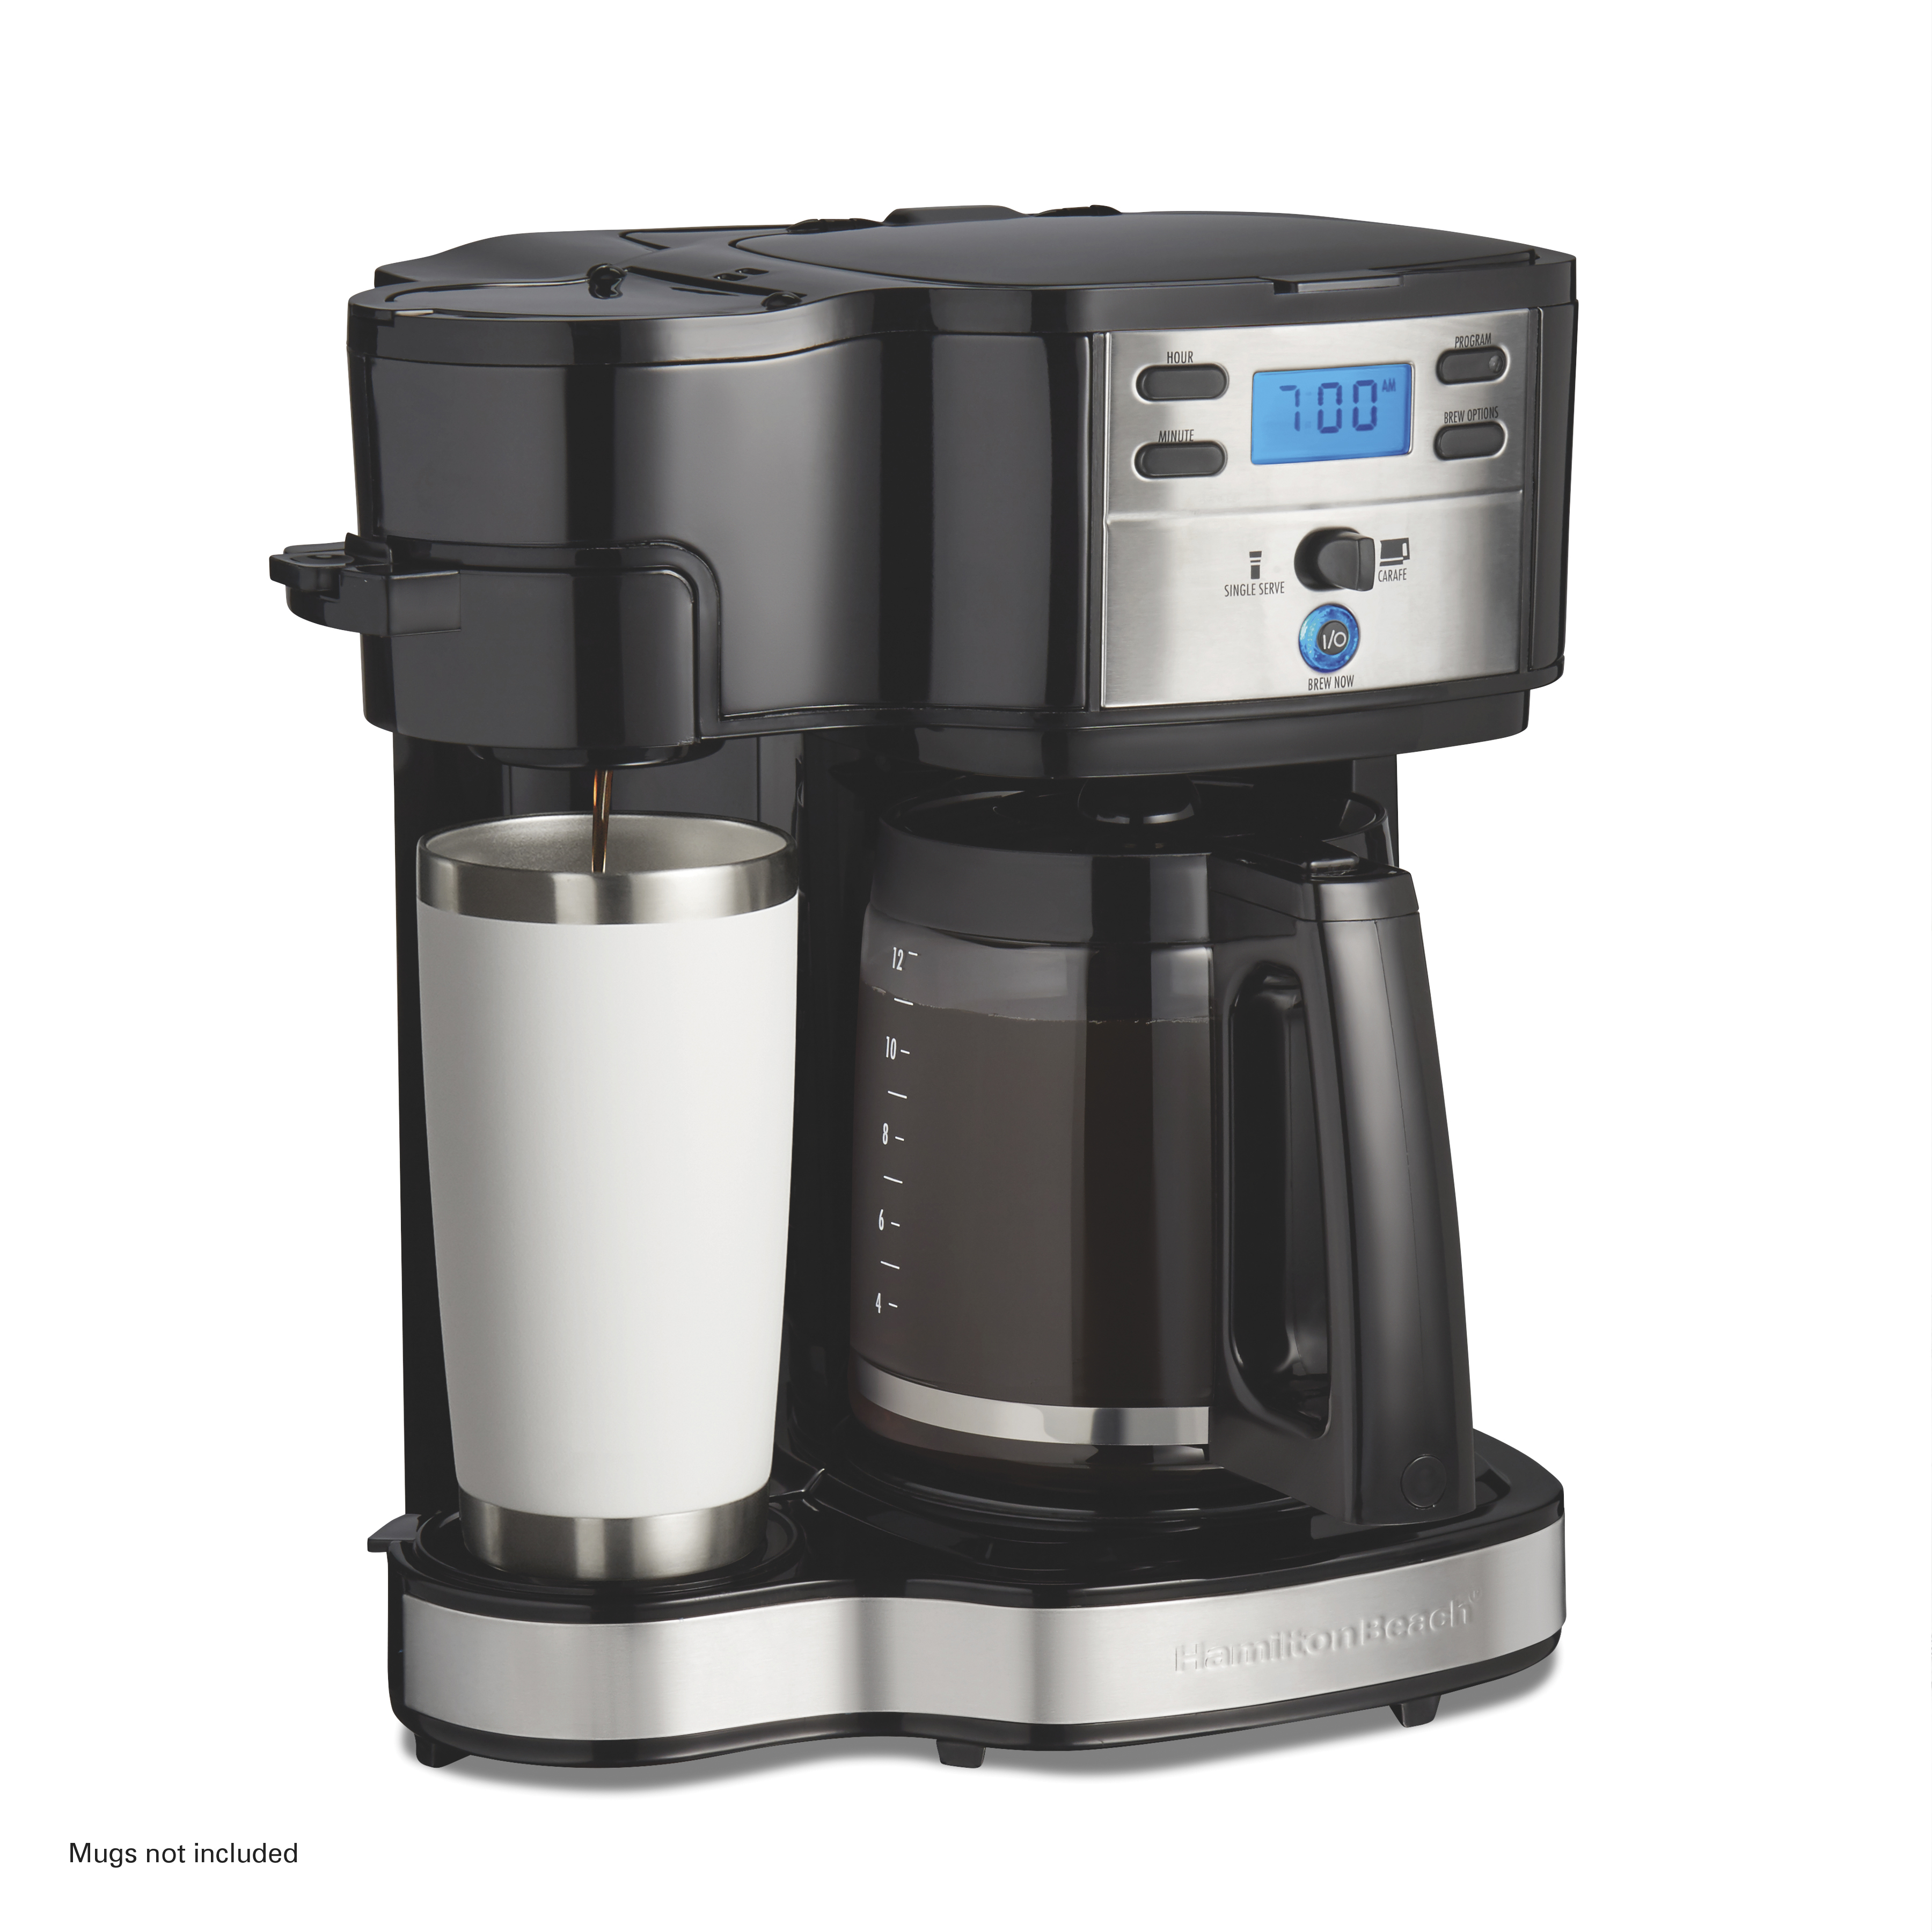 Hamilton Beach 2-Way Programmable Coffee Maker, Single-Serve and 12-Cup Pot, Glass Carafe, Stainless Steel, New, 47650 - image 2 of 8